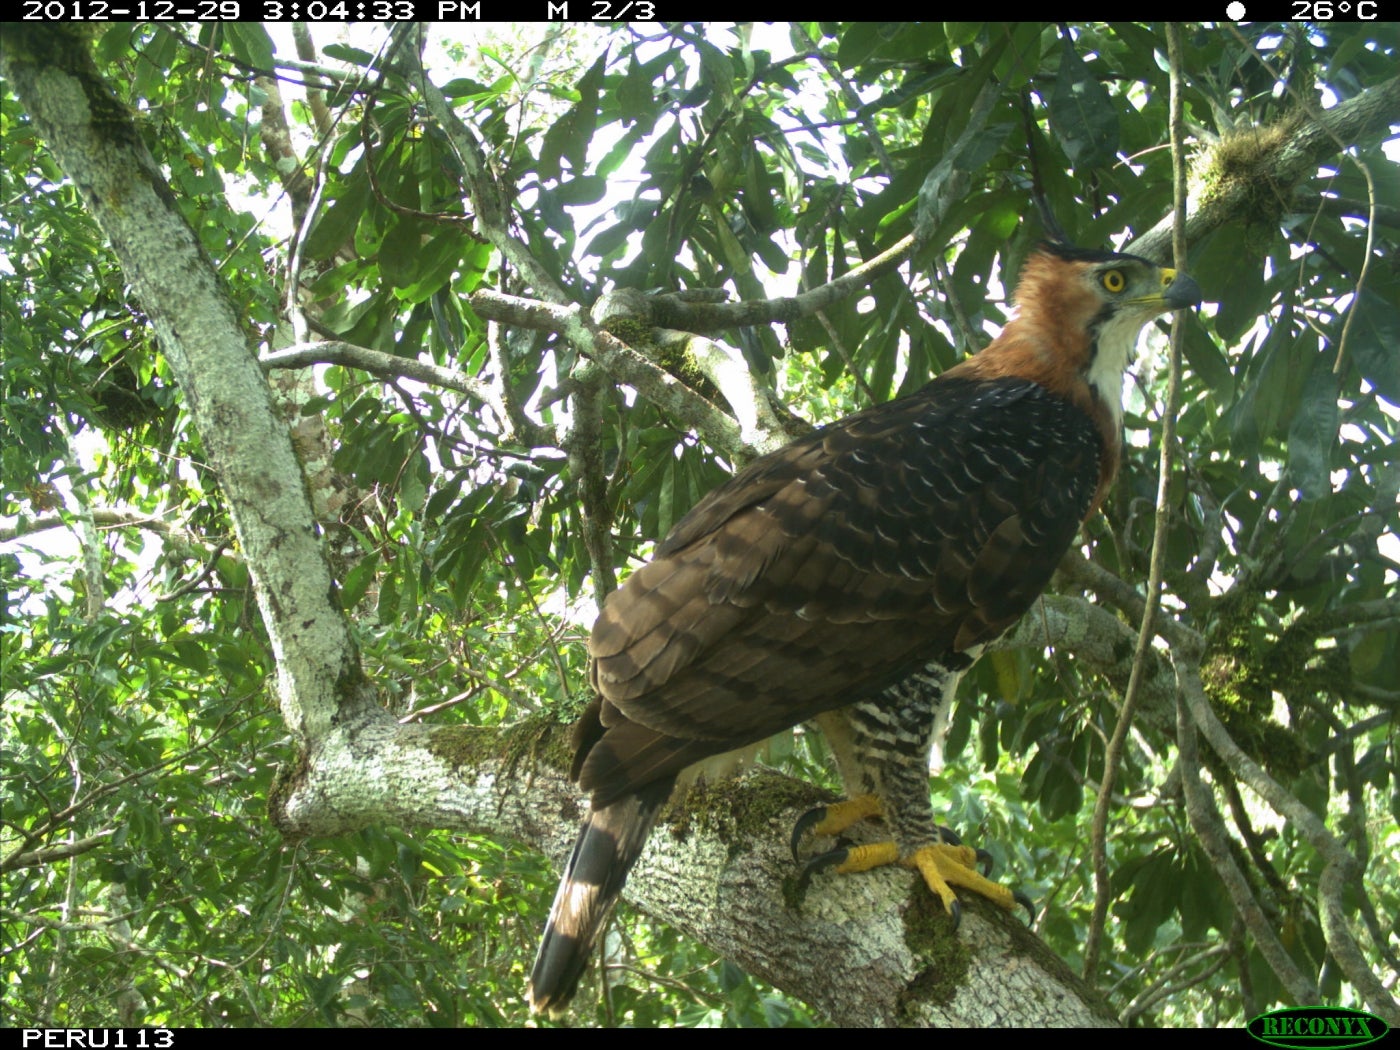 A camera trap photo of an ornate hawk eagle perched on a branch in the treetop of the Peruvian Amazon rainforest.